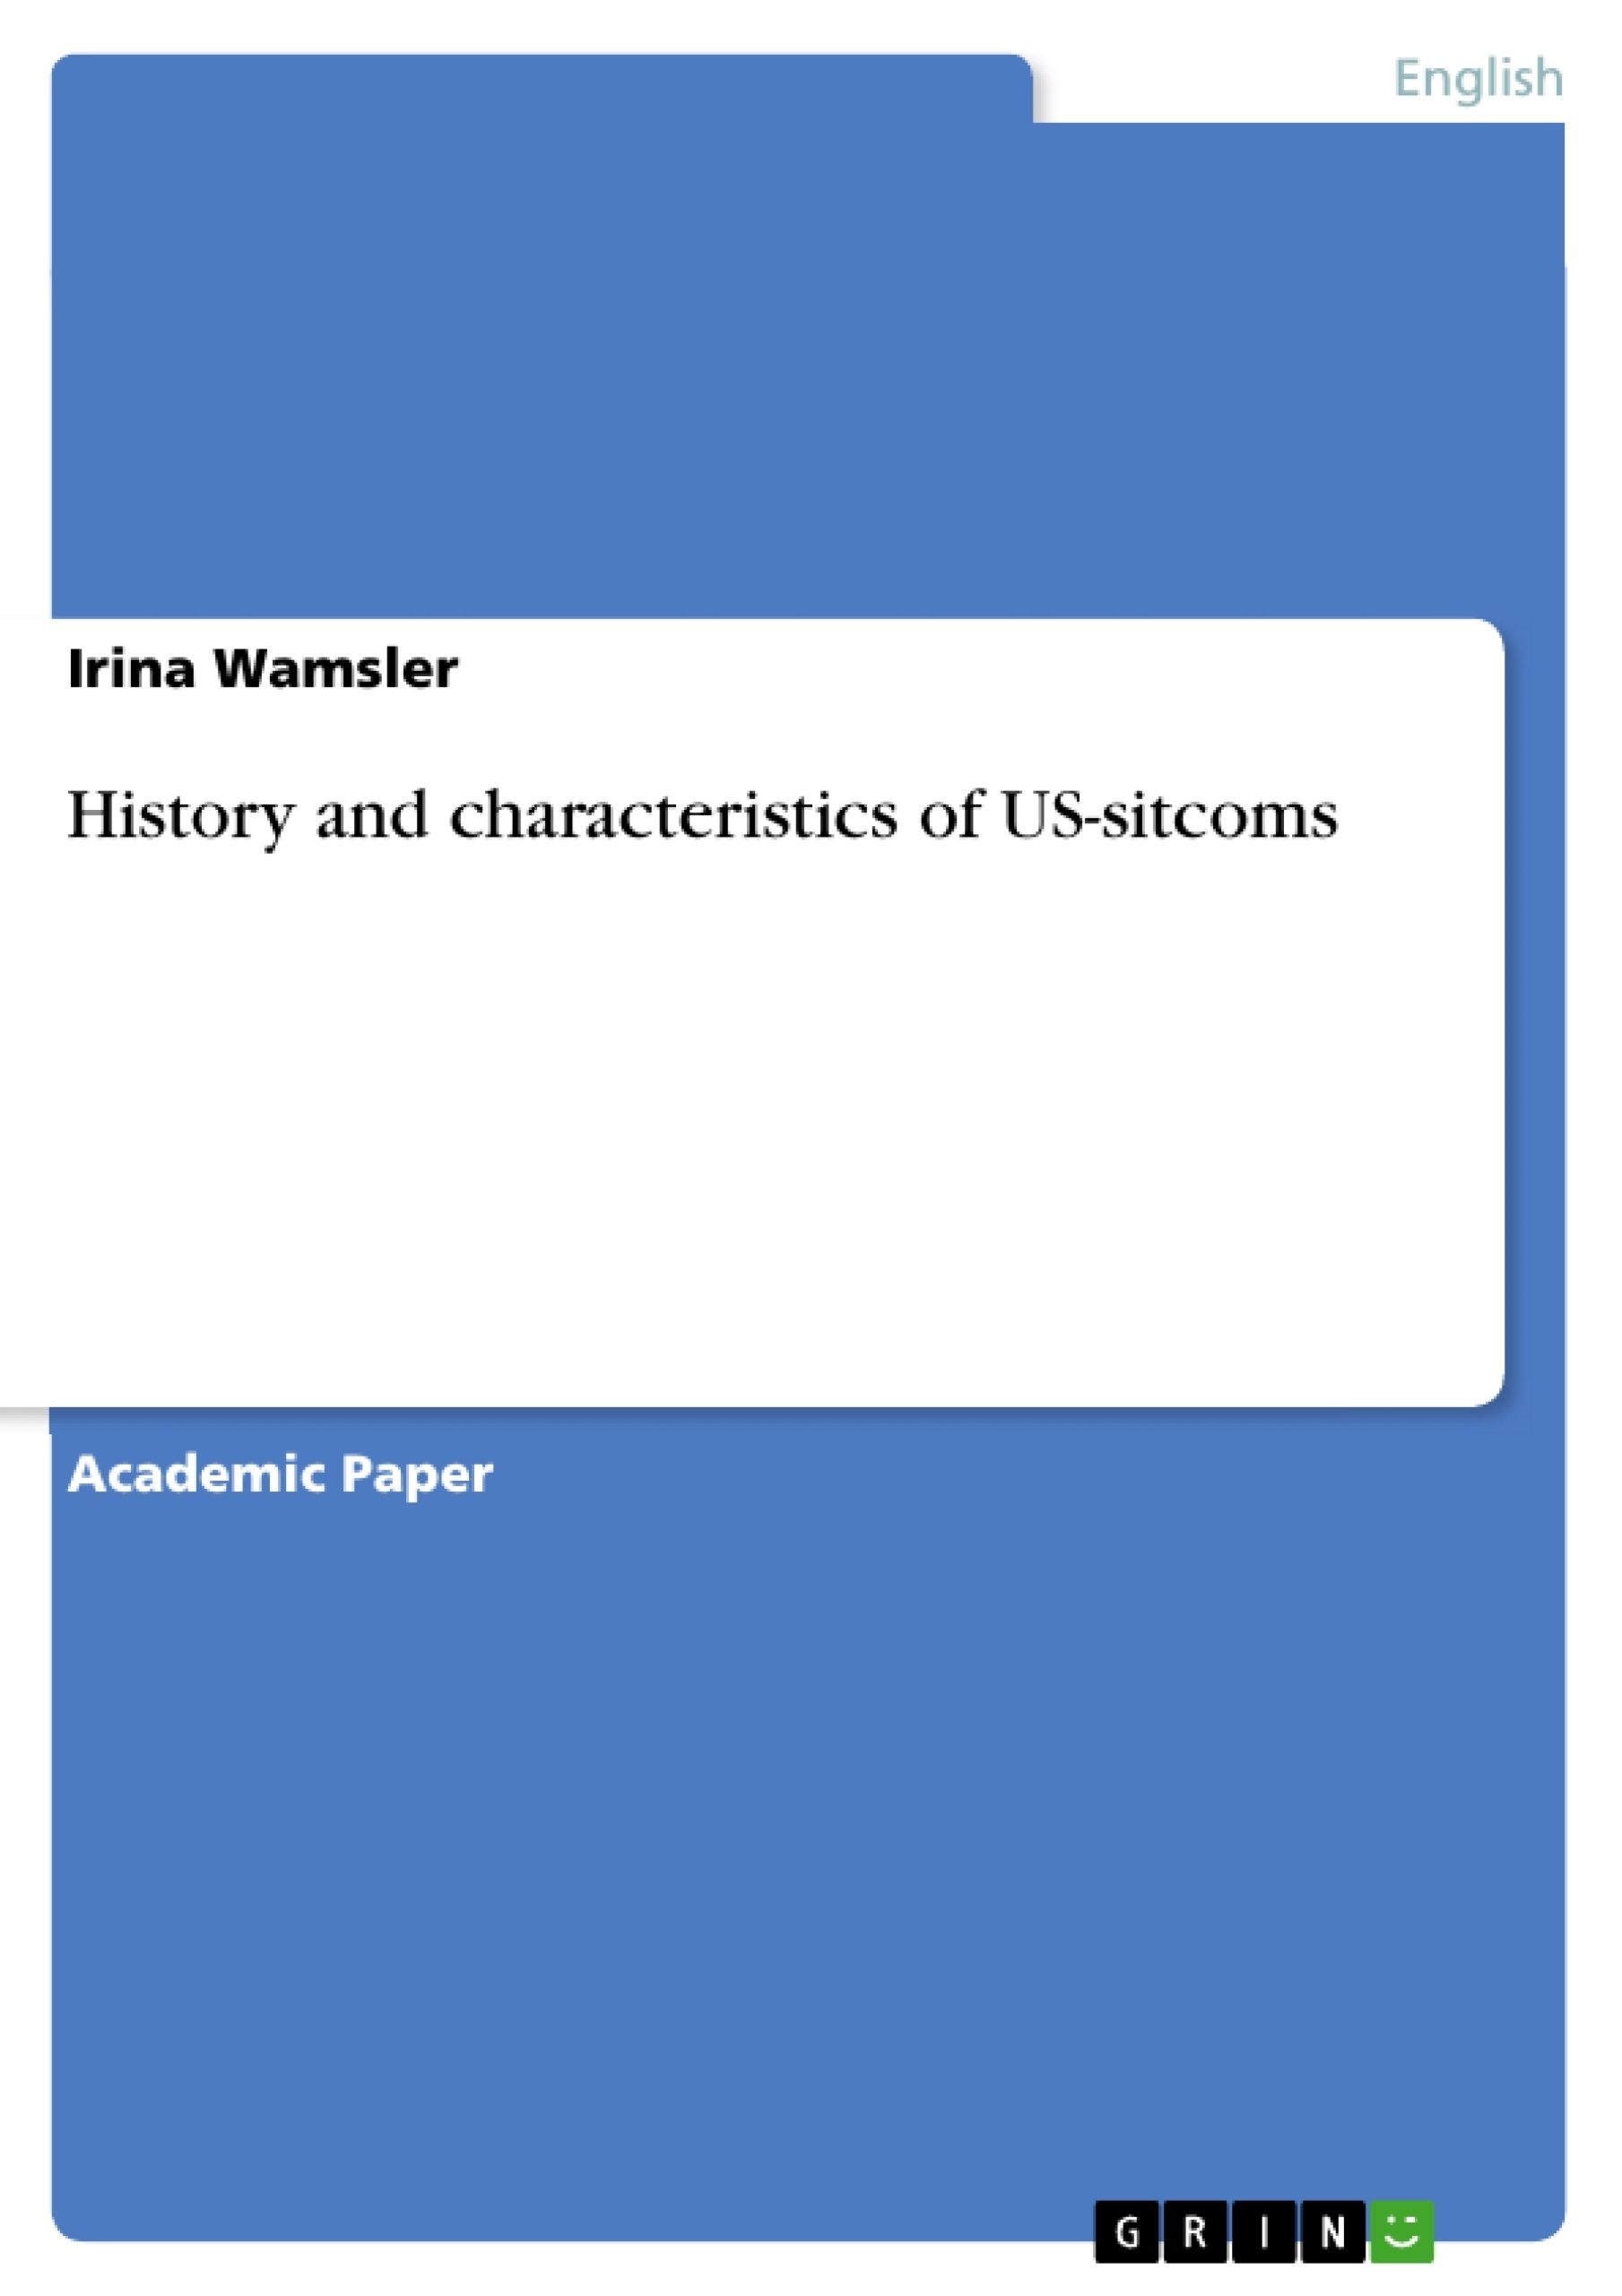 Título: History and characteristics of US-sitcoms